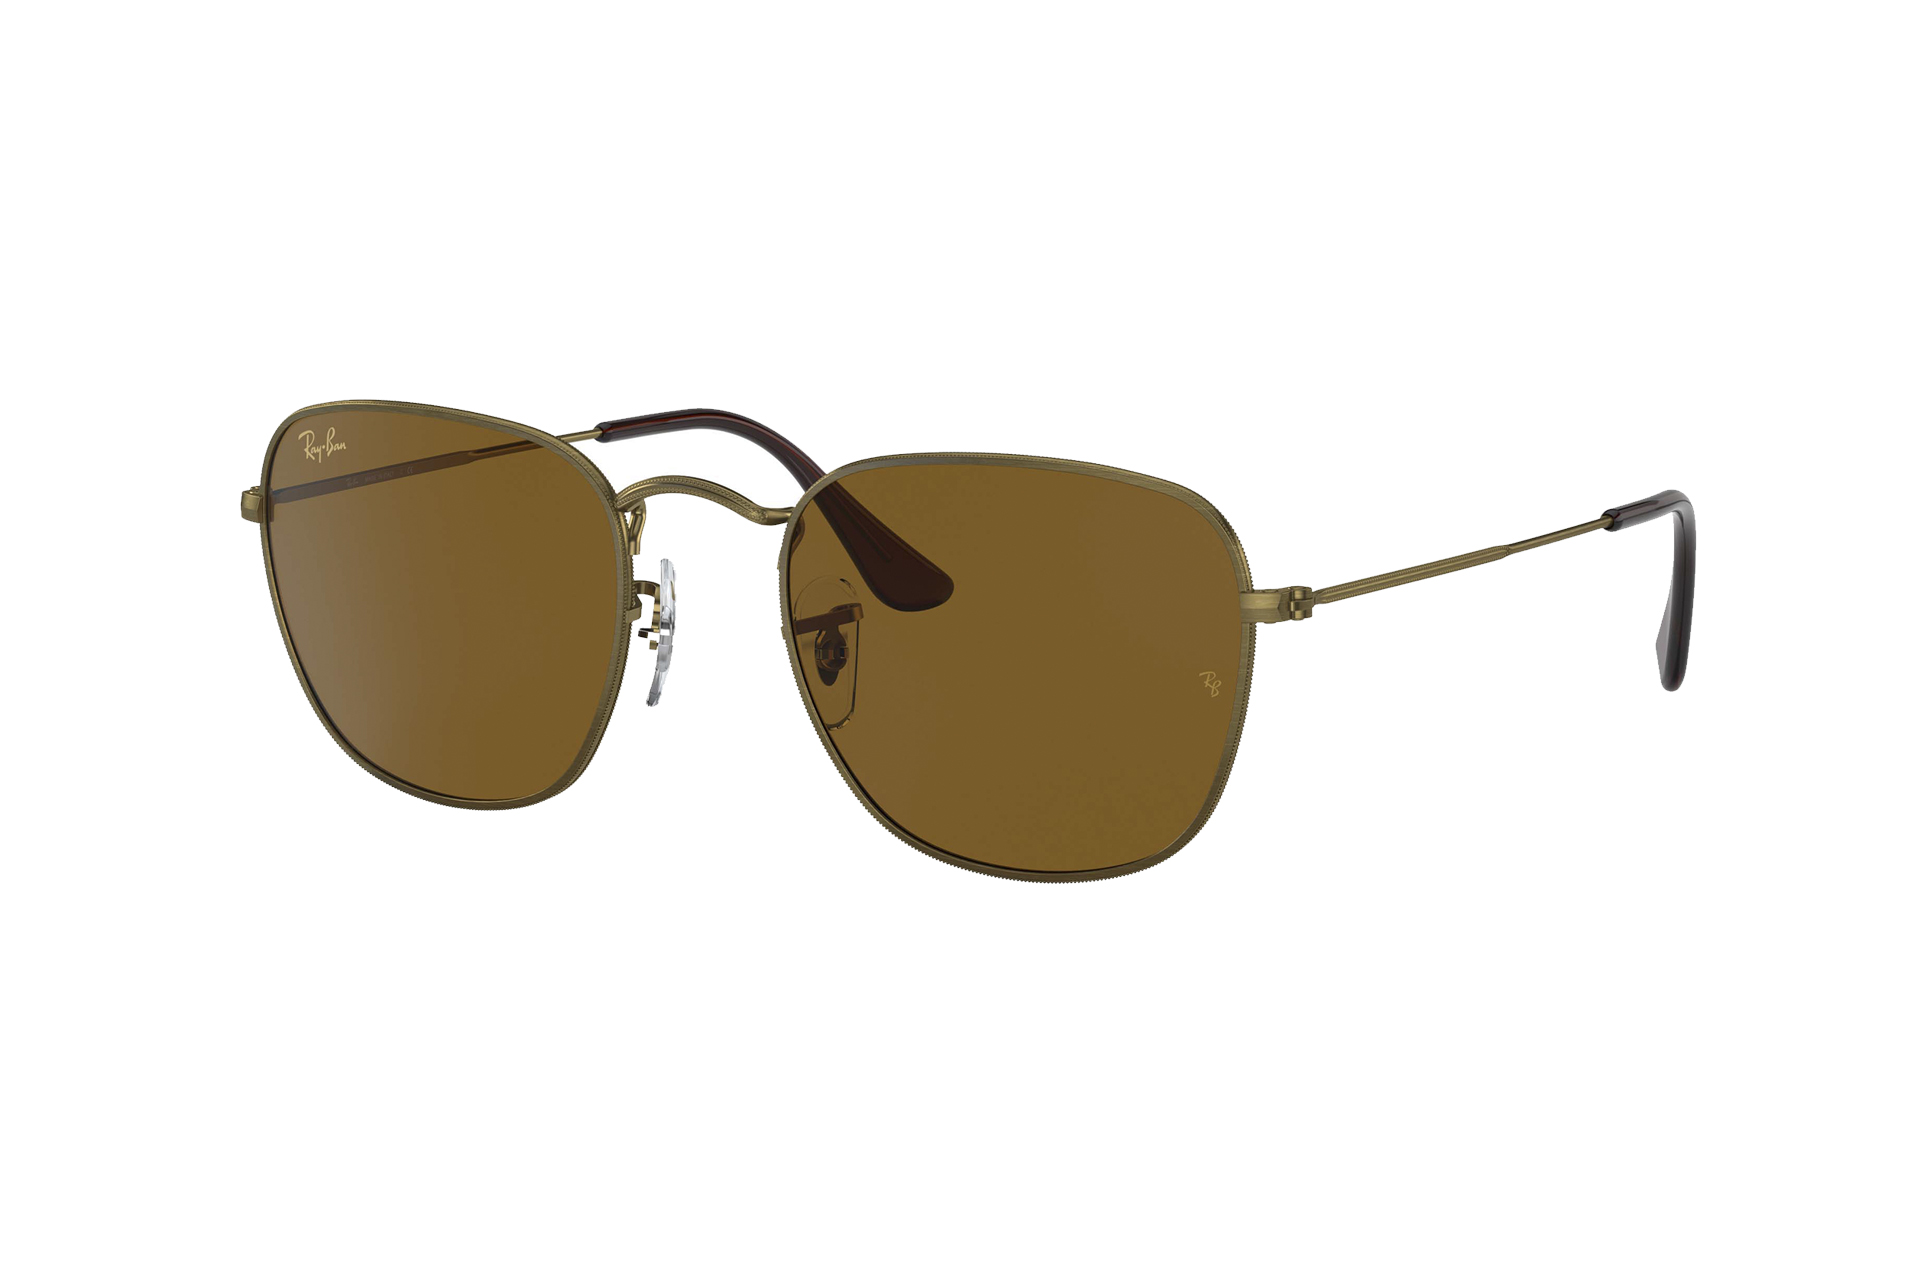 _0016_opplanet-ray-ban-frank-rb3857-sunglasses-brown-lenses-antique-gold-51-rb3857-922833-51-main